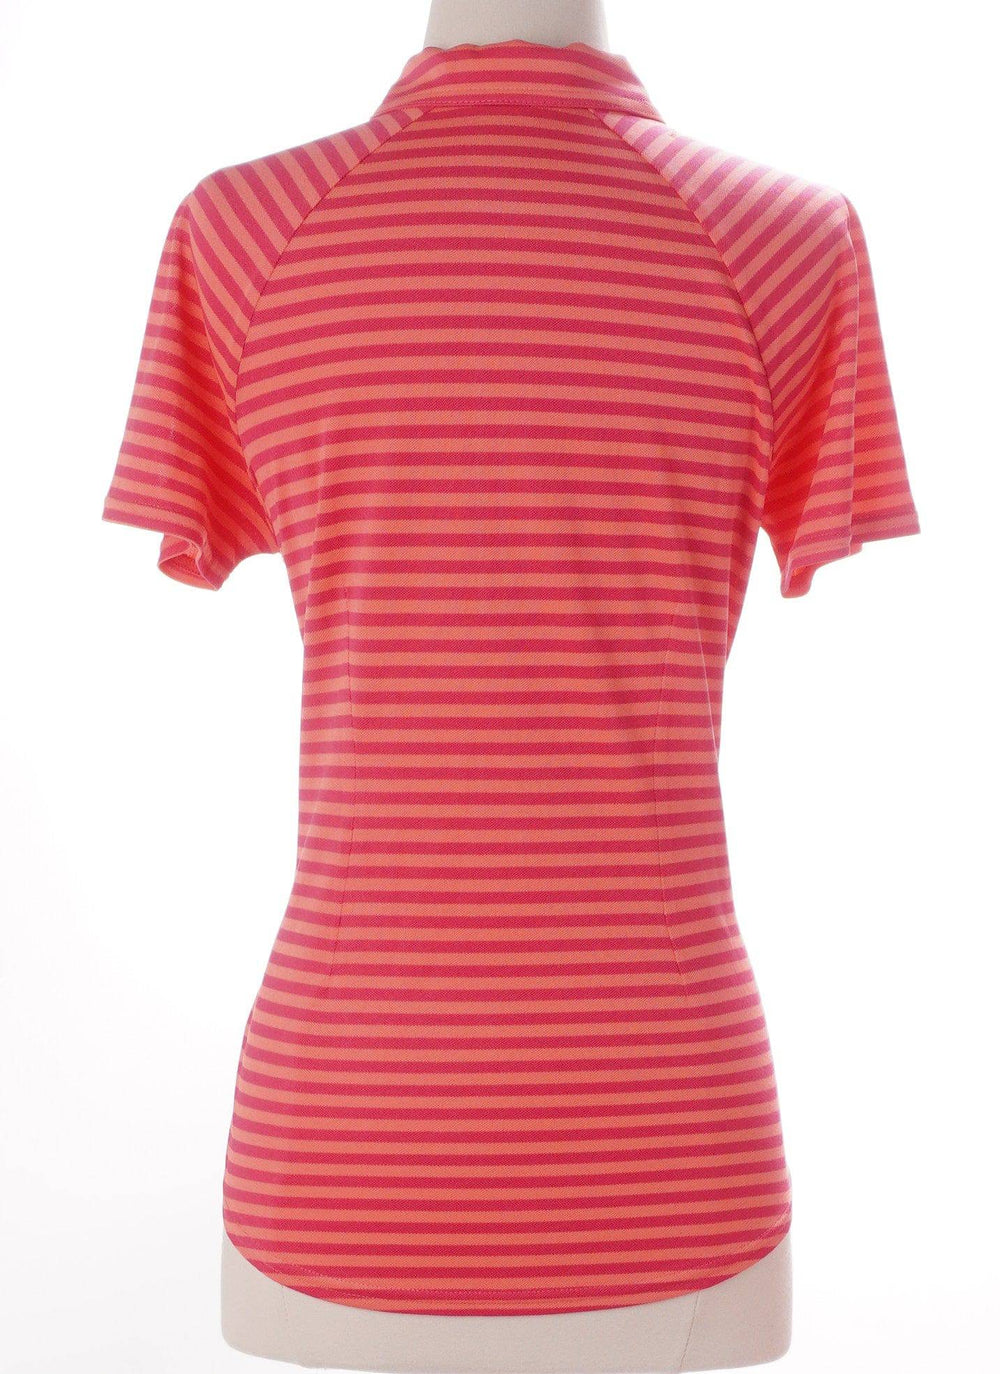 Skorzie Small / Pink Jofit Short Sleeve Top Exclusive Product - Sunset Stripe- Size Small Apparel & Accessories